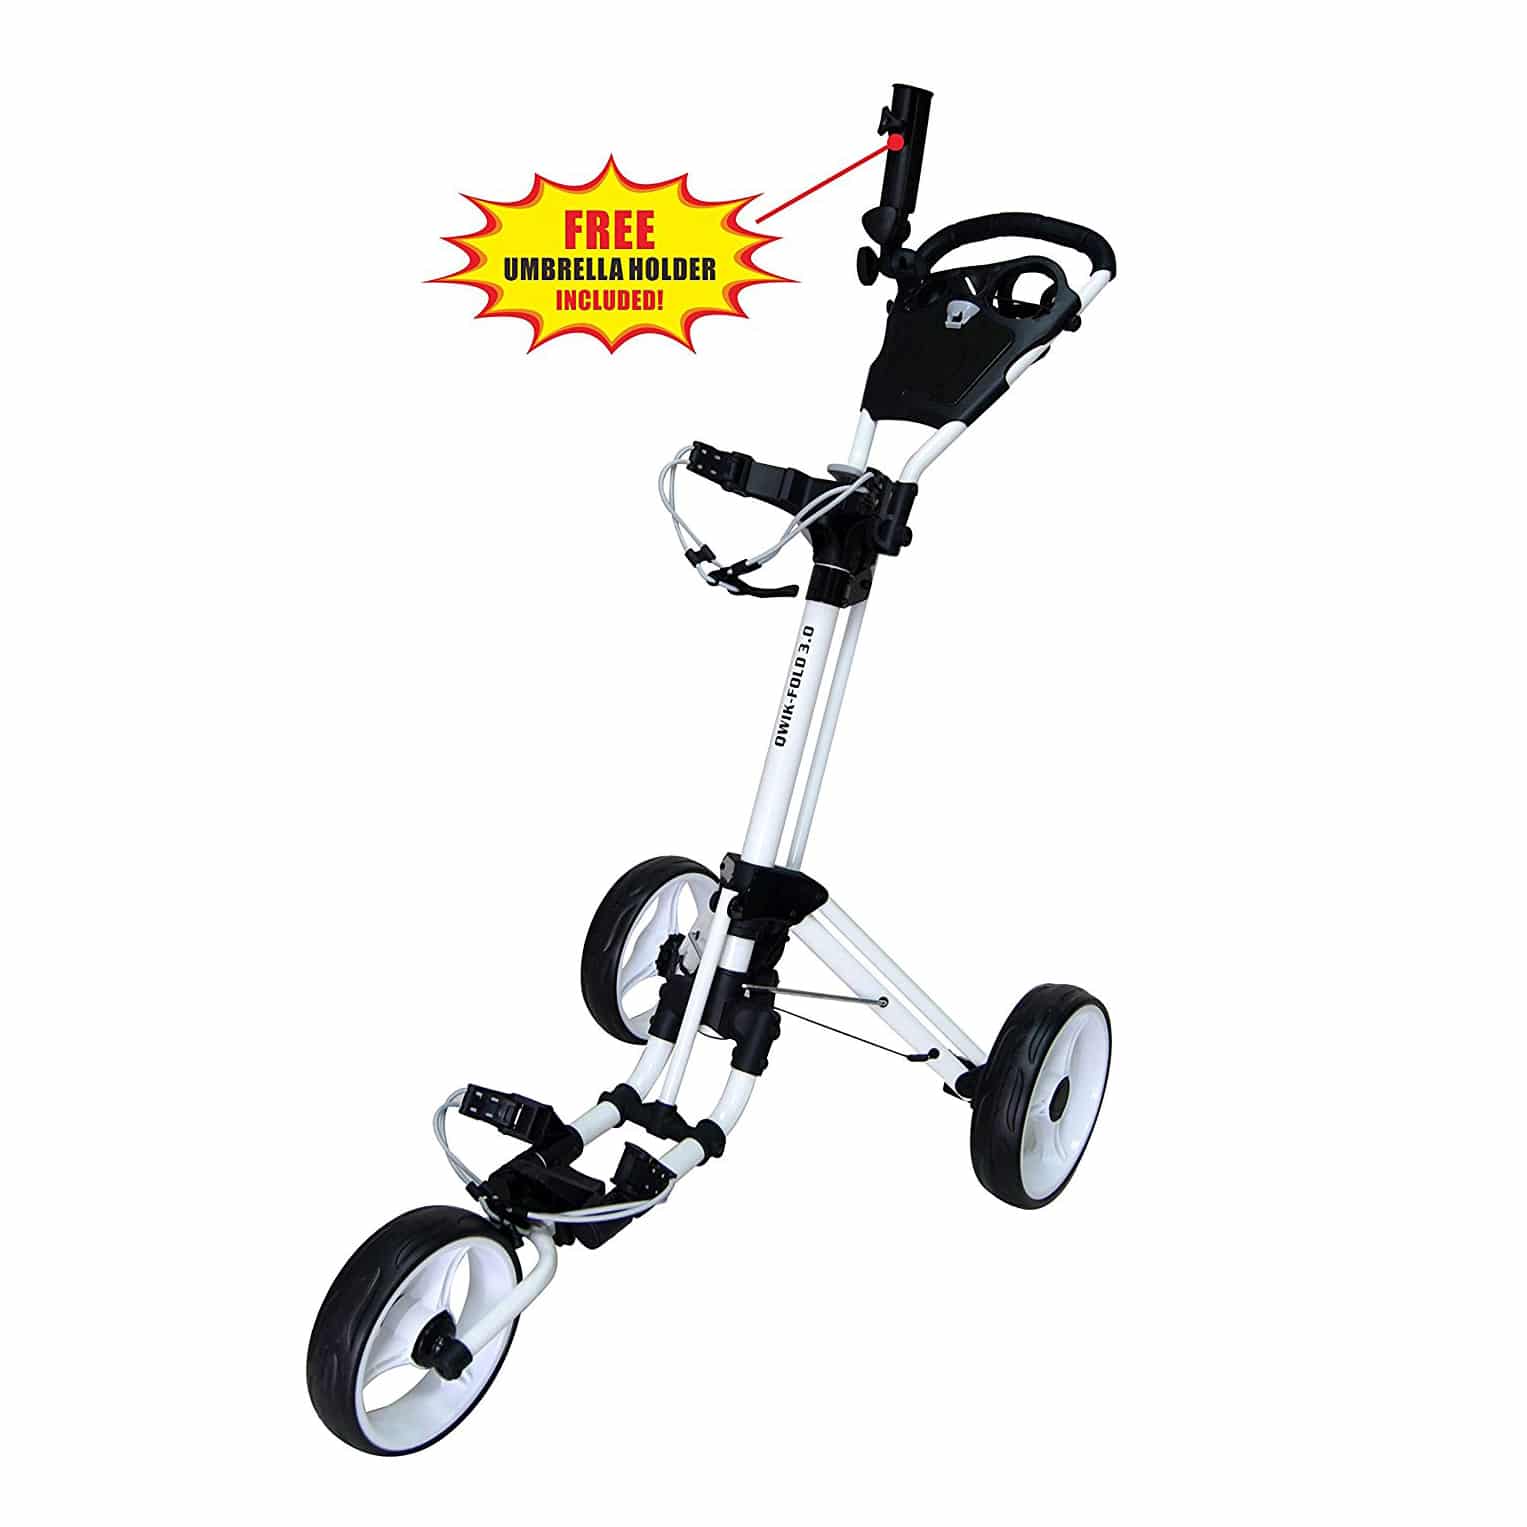 Top 10 Best Golf Push Carts in 2021 Reviews Guide